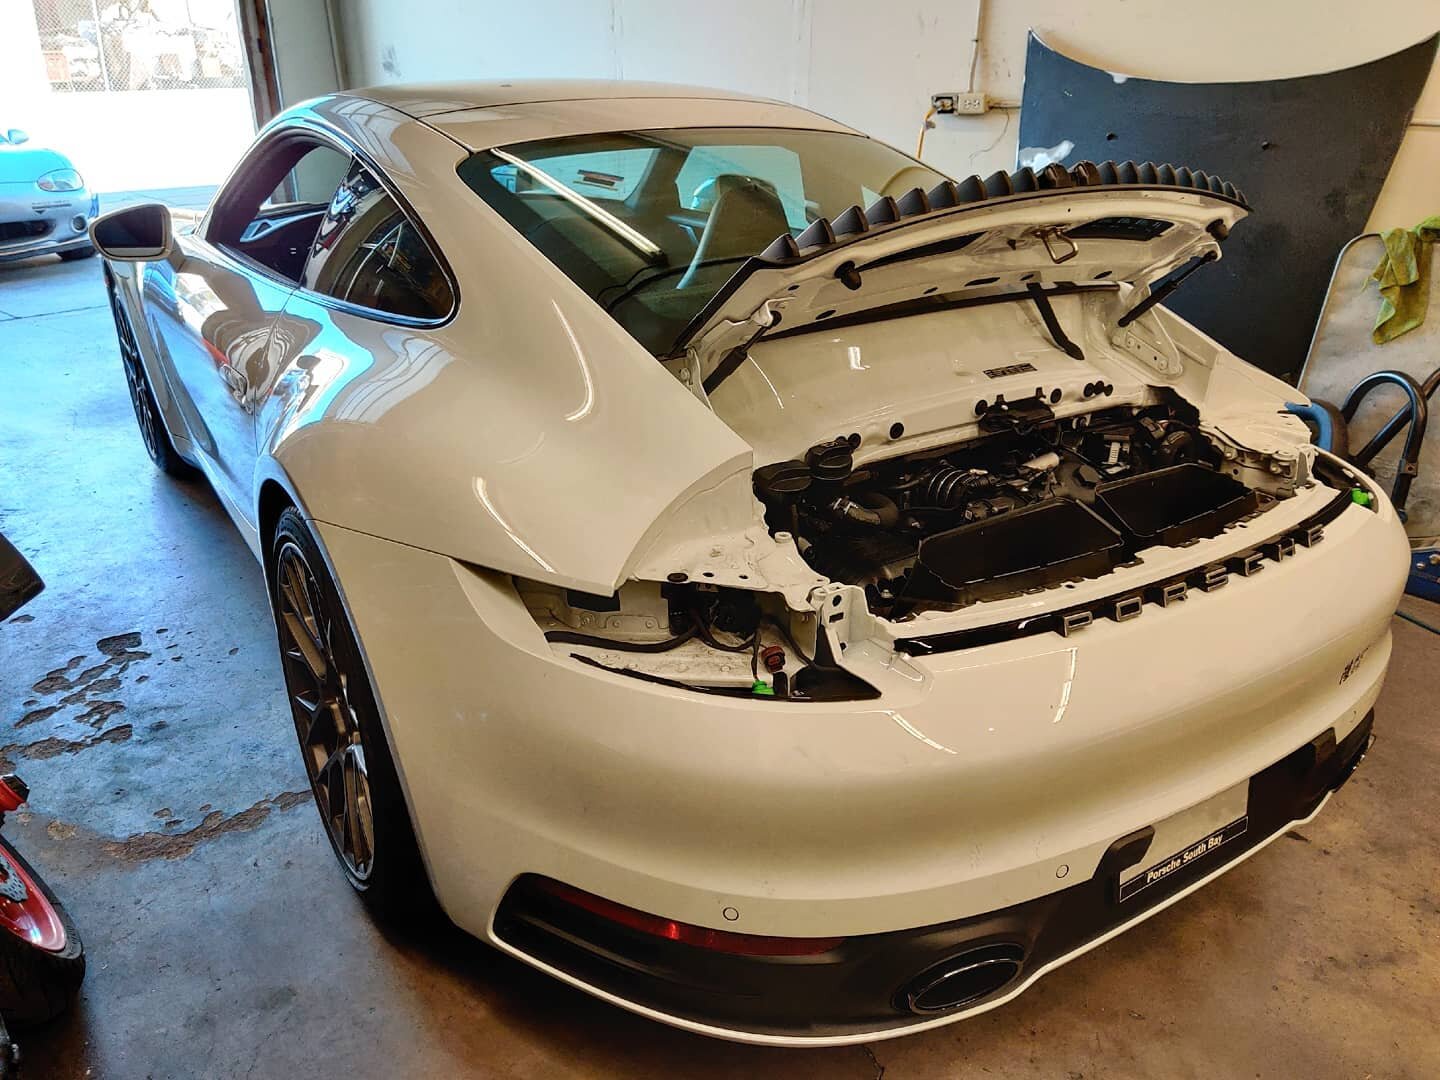 Take a guess on what we are installing on the new 992.
🔹🔹🔹🔹🔹🔹🔹🔹🔹🔹🔹🔹🔹
🔹🔹🔹🔹🔹🔹🔹
#car #carlife #carlifestyle #instacar #carstagram #carporn #carsofinstagram #carwithoutlimits #porsche #porscheclub #porschelife #porschelove #porschefan